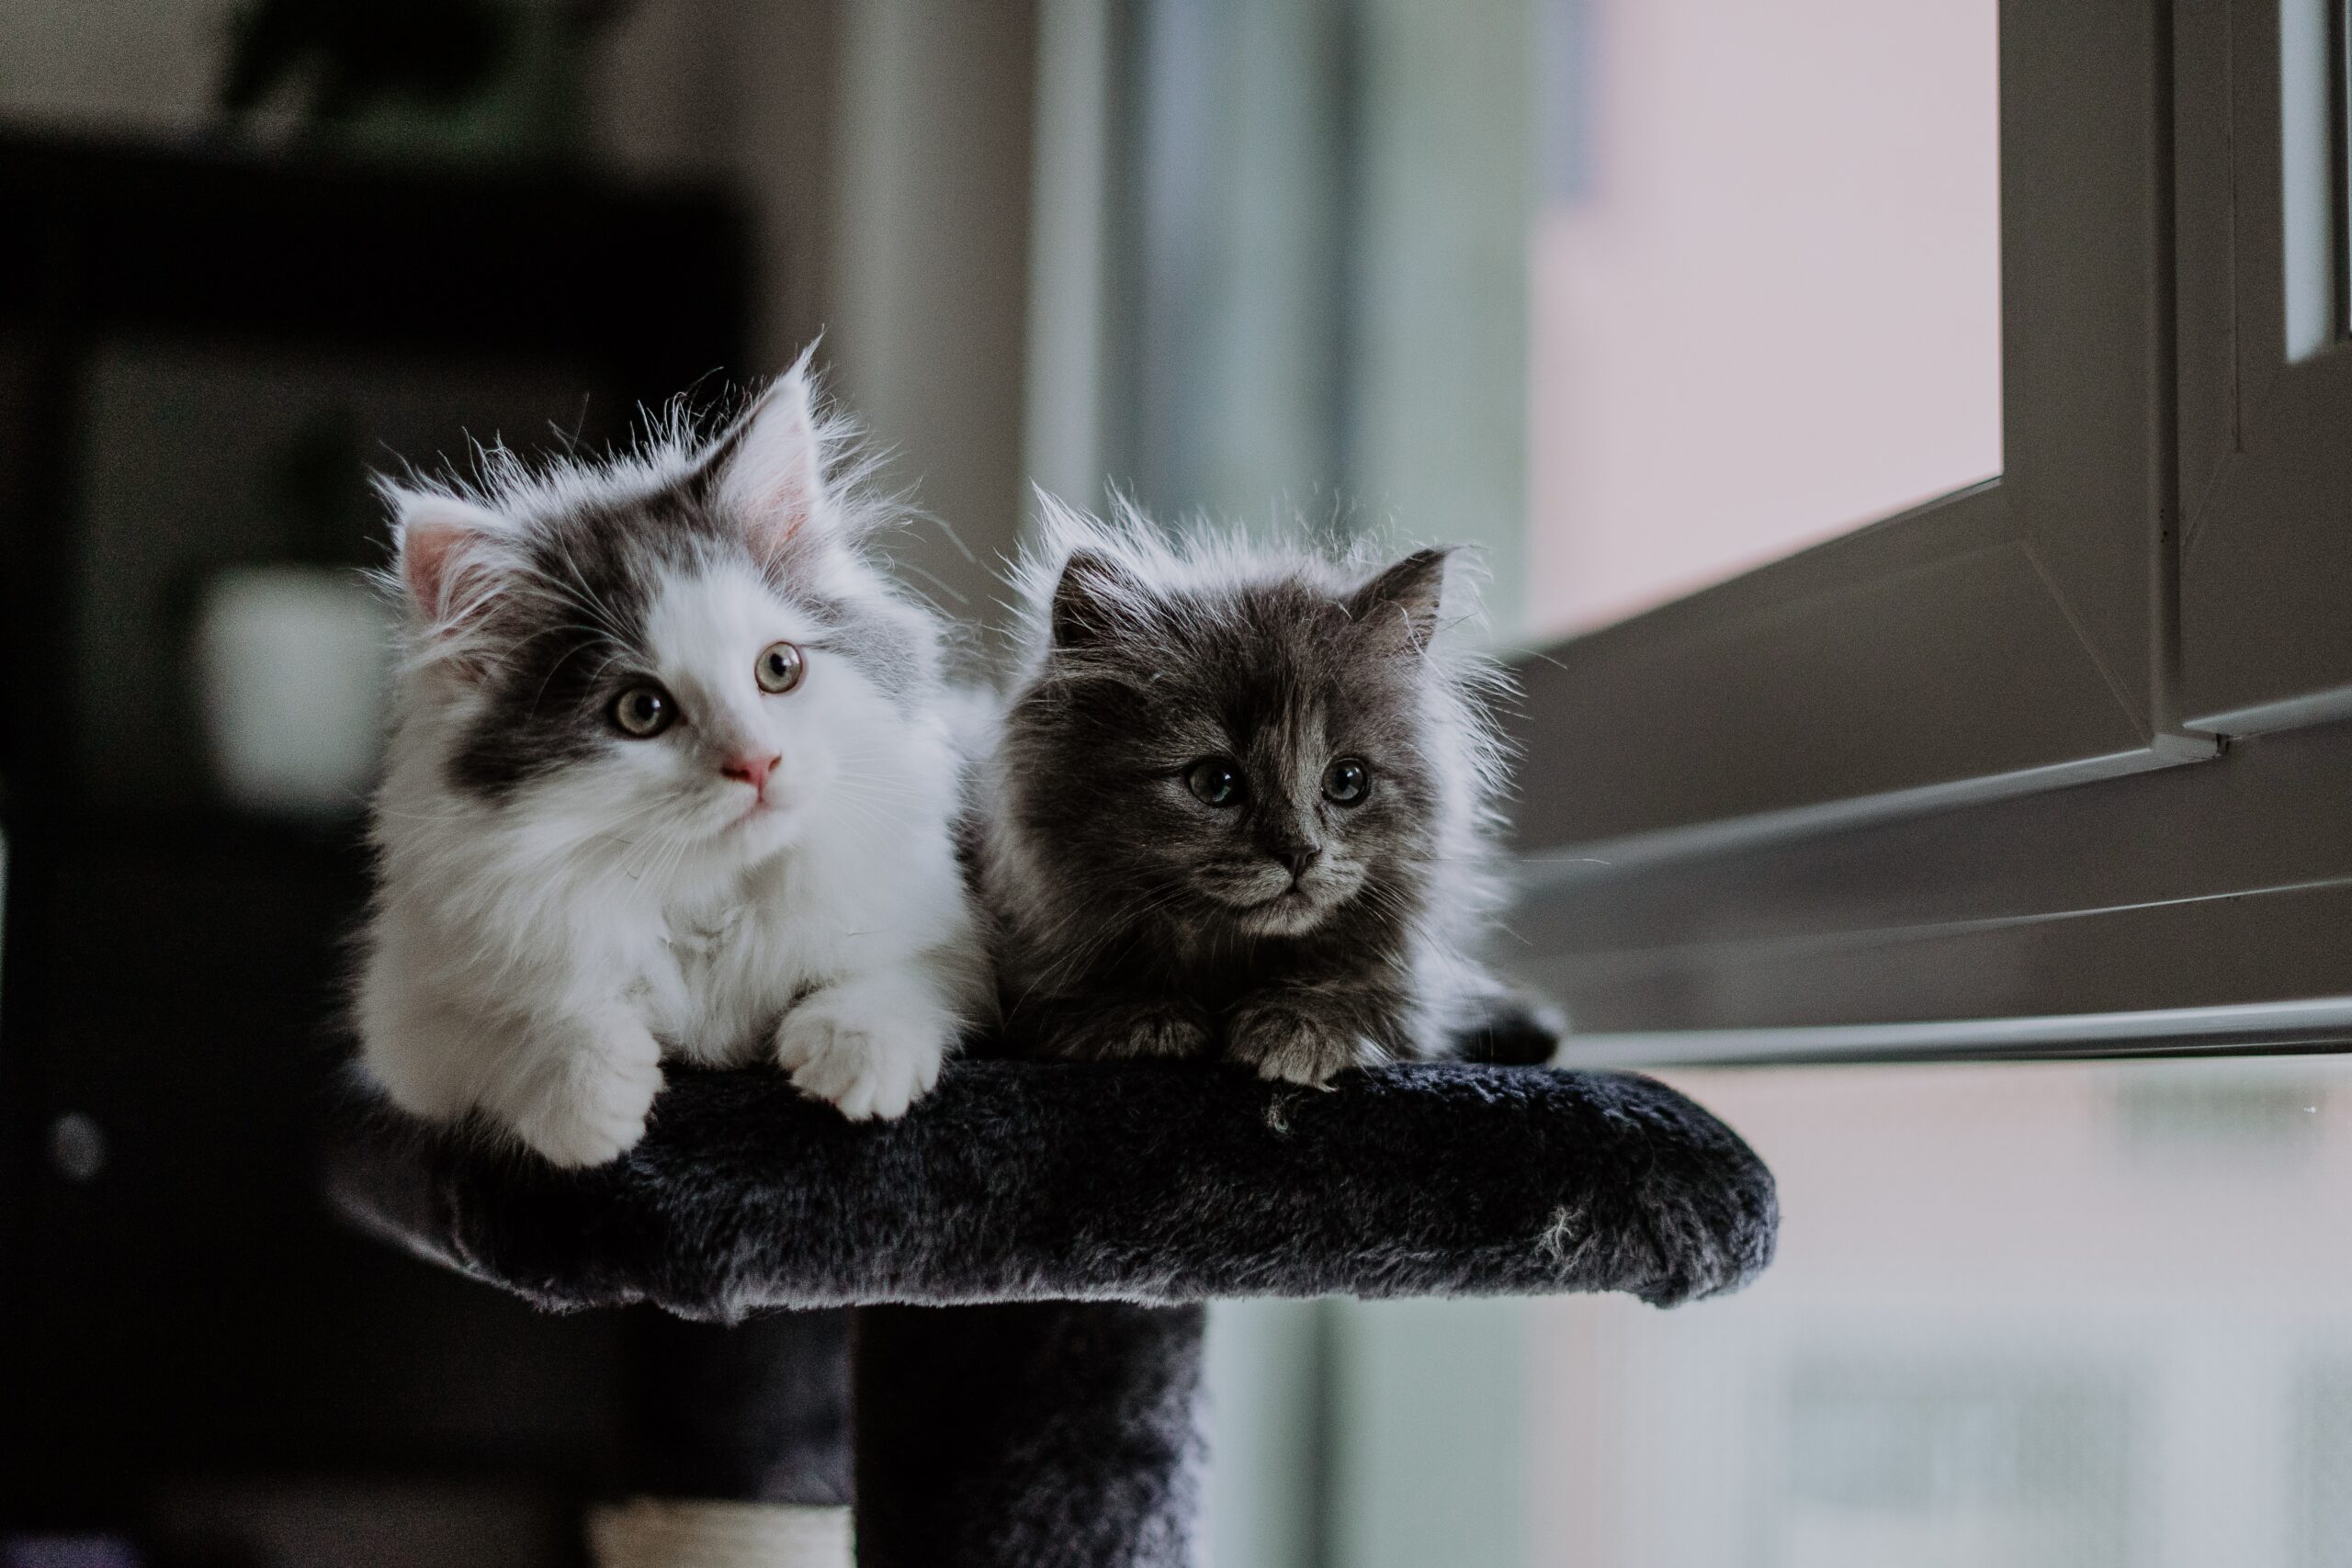 Two fluffy kittens sitting next to each other on a cat tree.